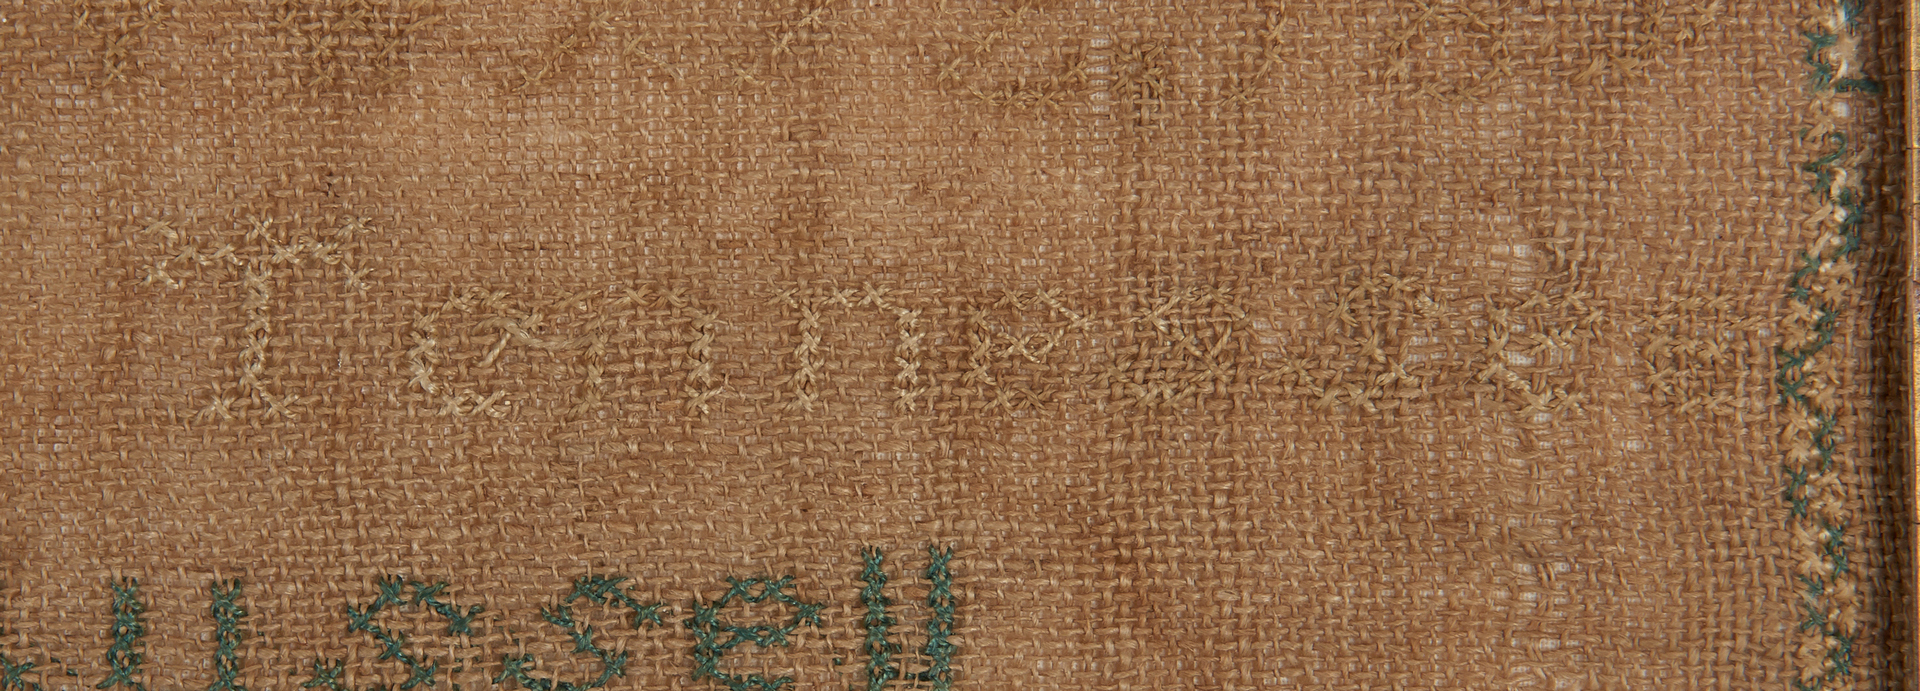 Lot 659: West Tennessee Sampler, 1837, Mary Jane Russell